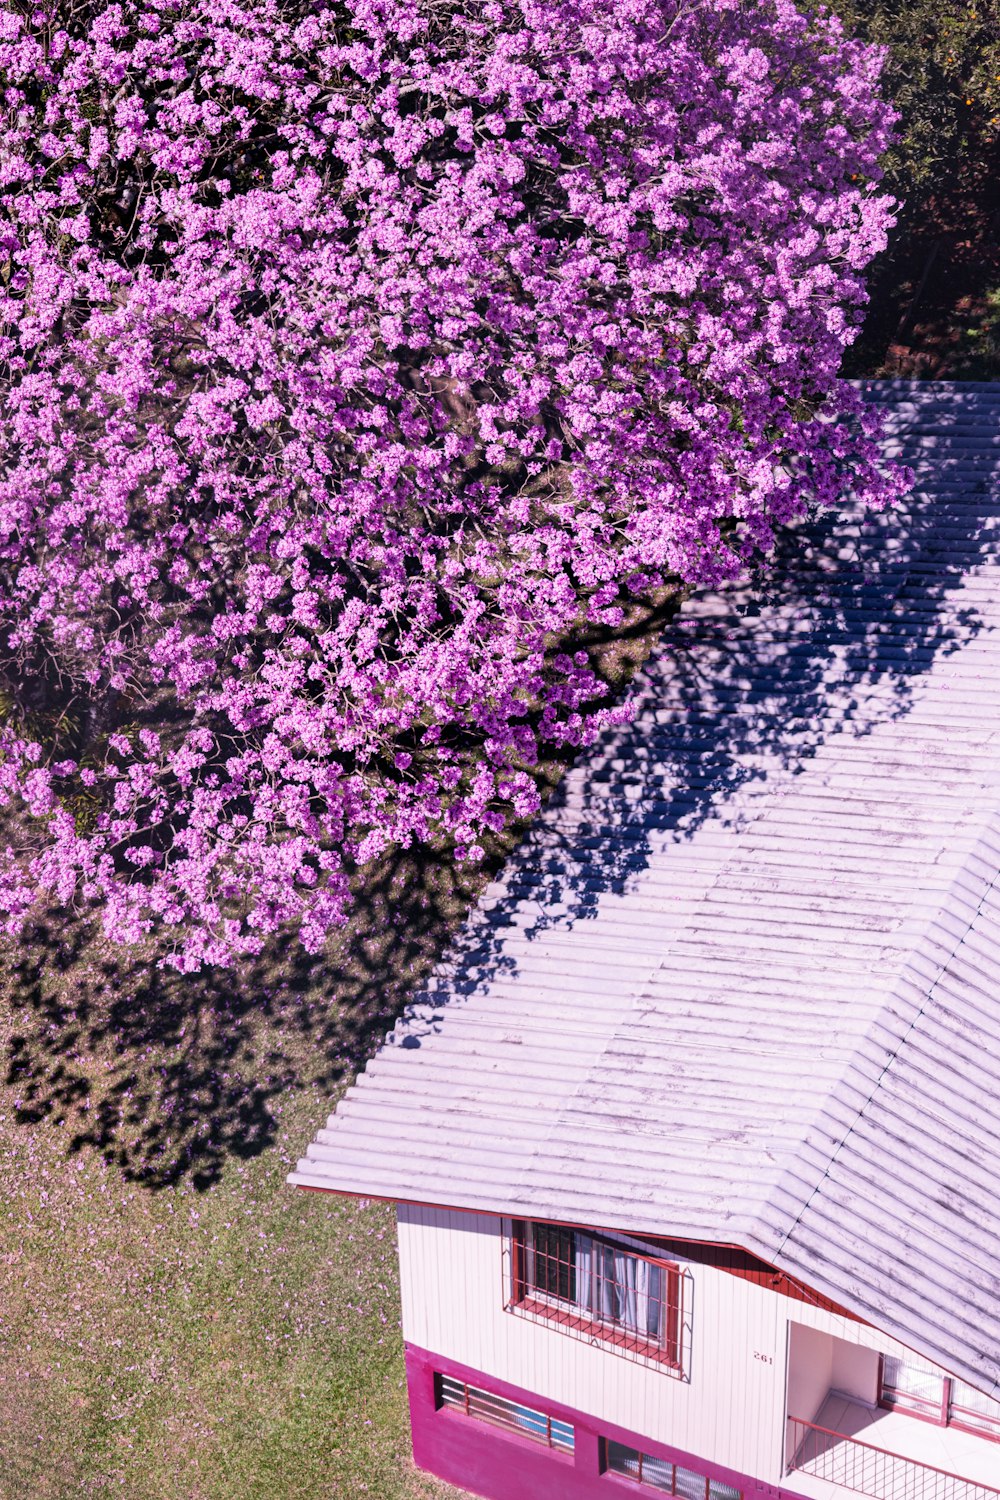 an aerial view of a house with purple flowers